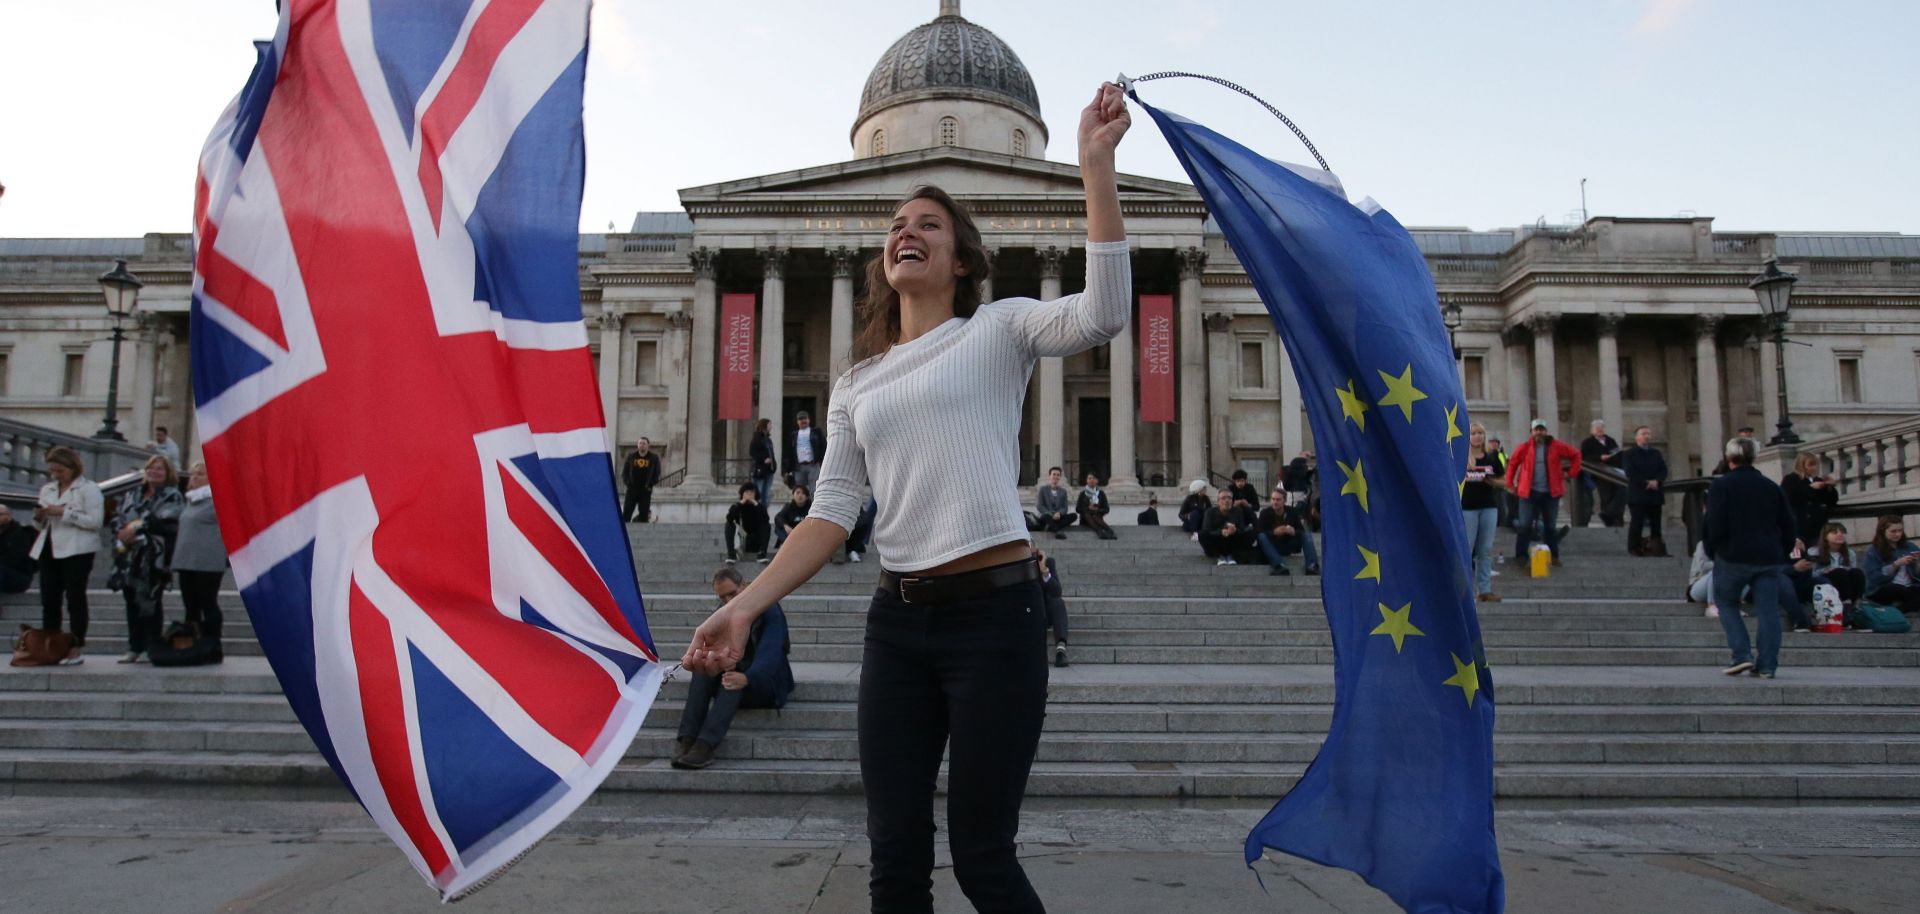 A woman waves the British and EU flags at a protest about the terms of the Brexit held in London's Trafalgar Square on Sept. 13, 2017.